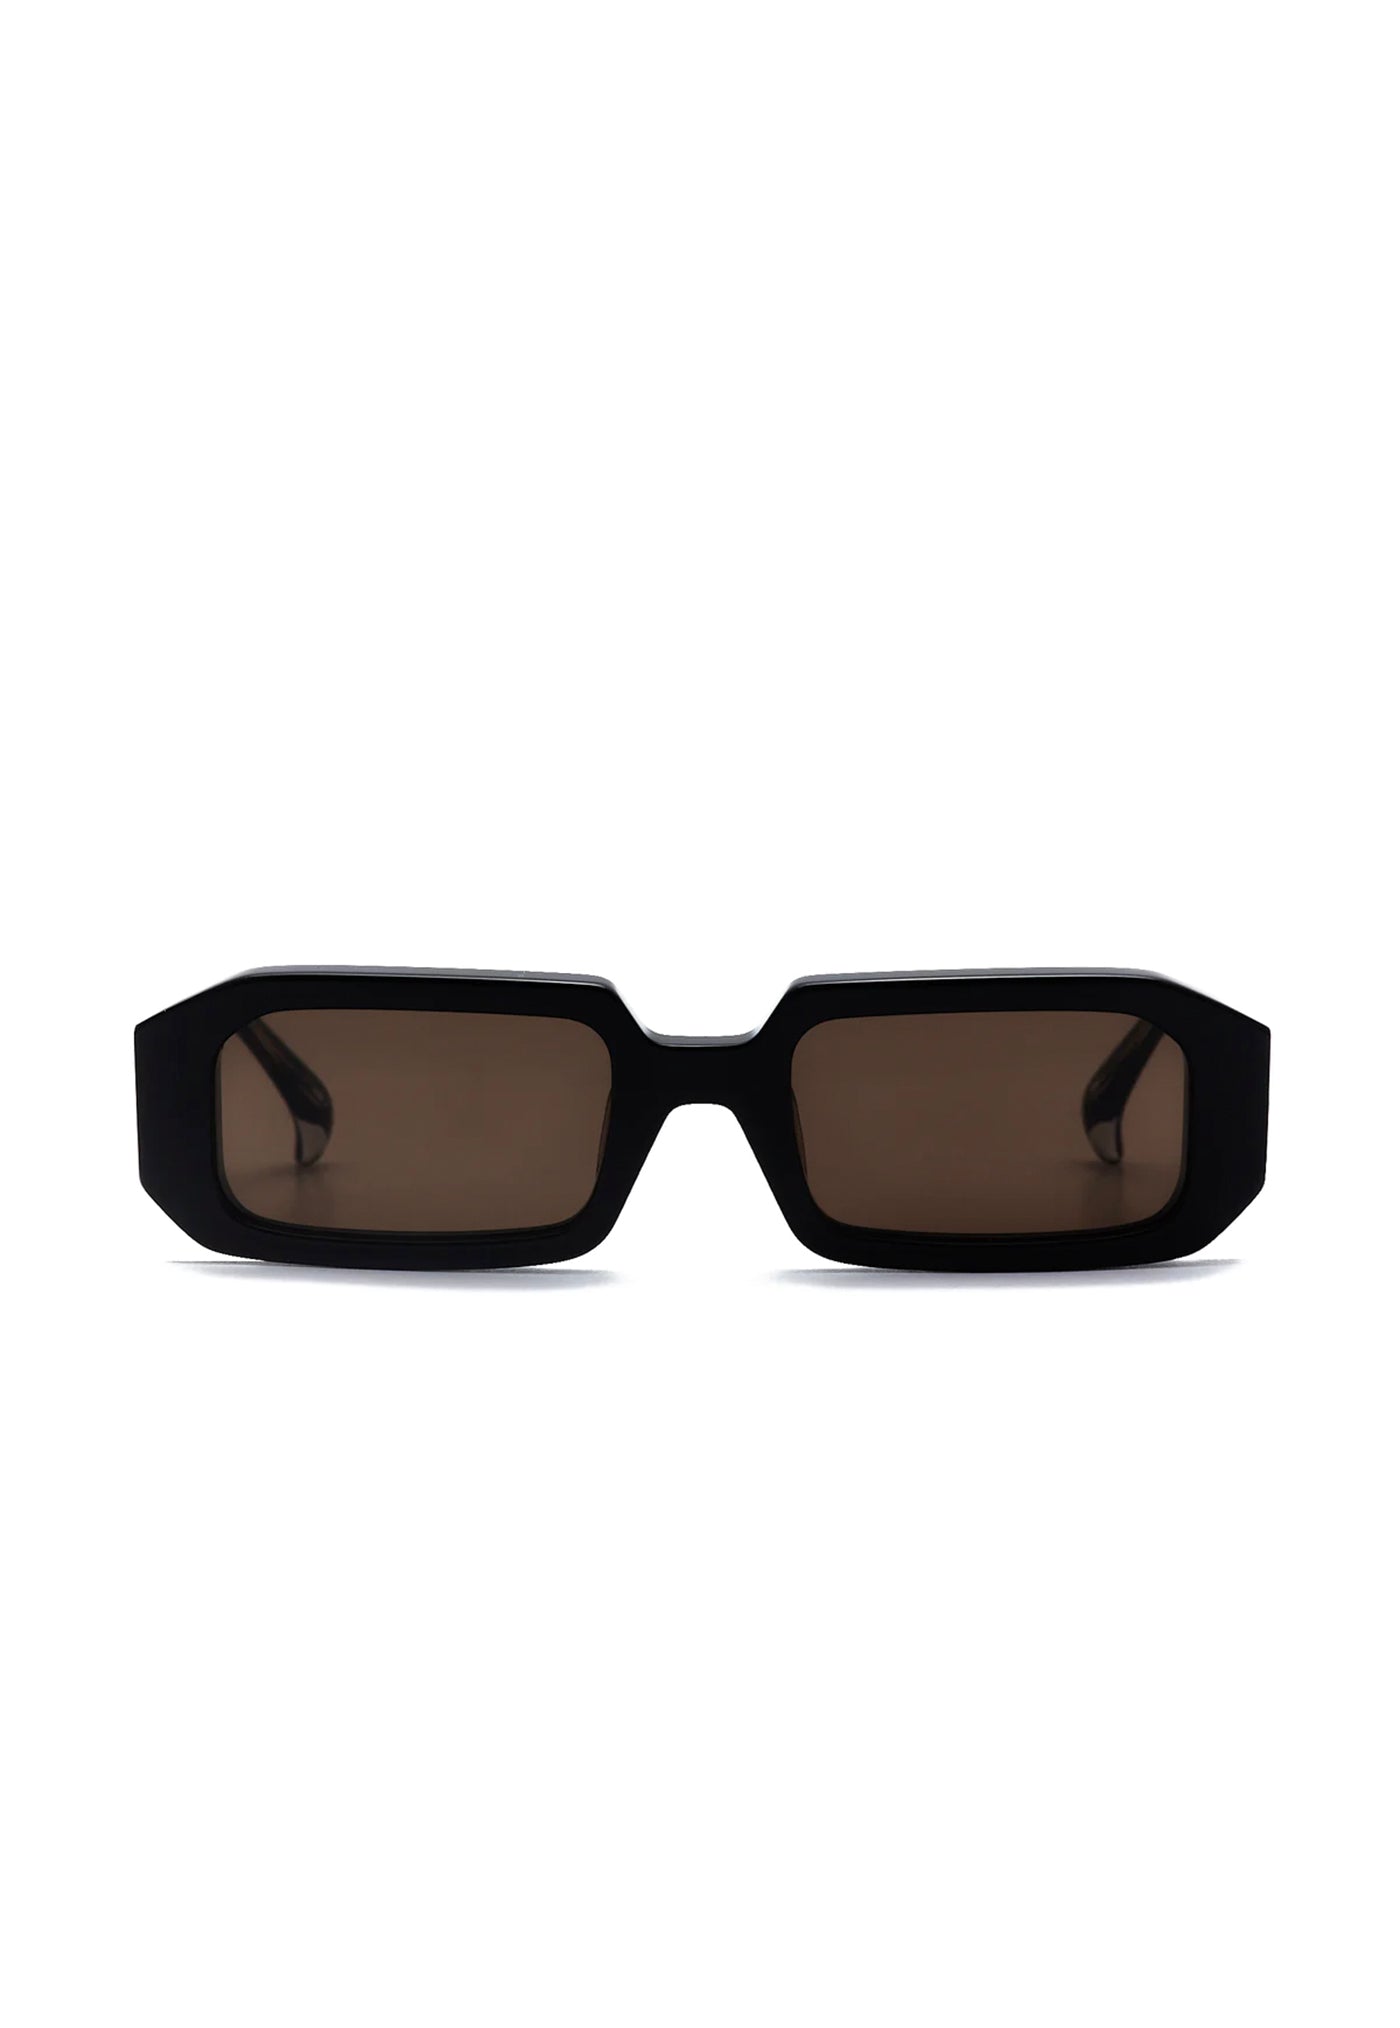 Ollie Sunglasses - Black sold by Angel Divine